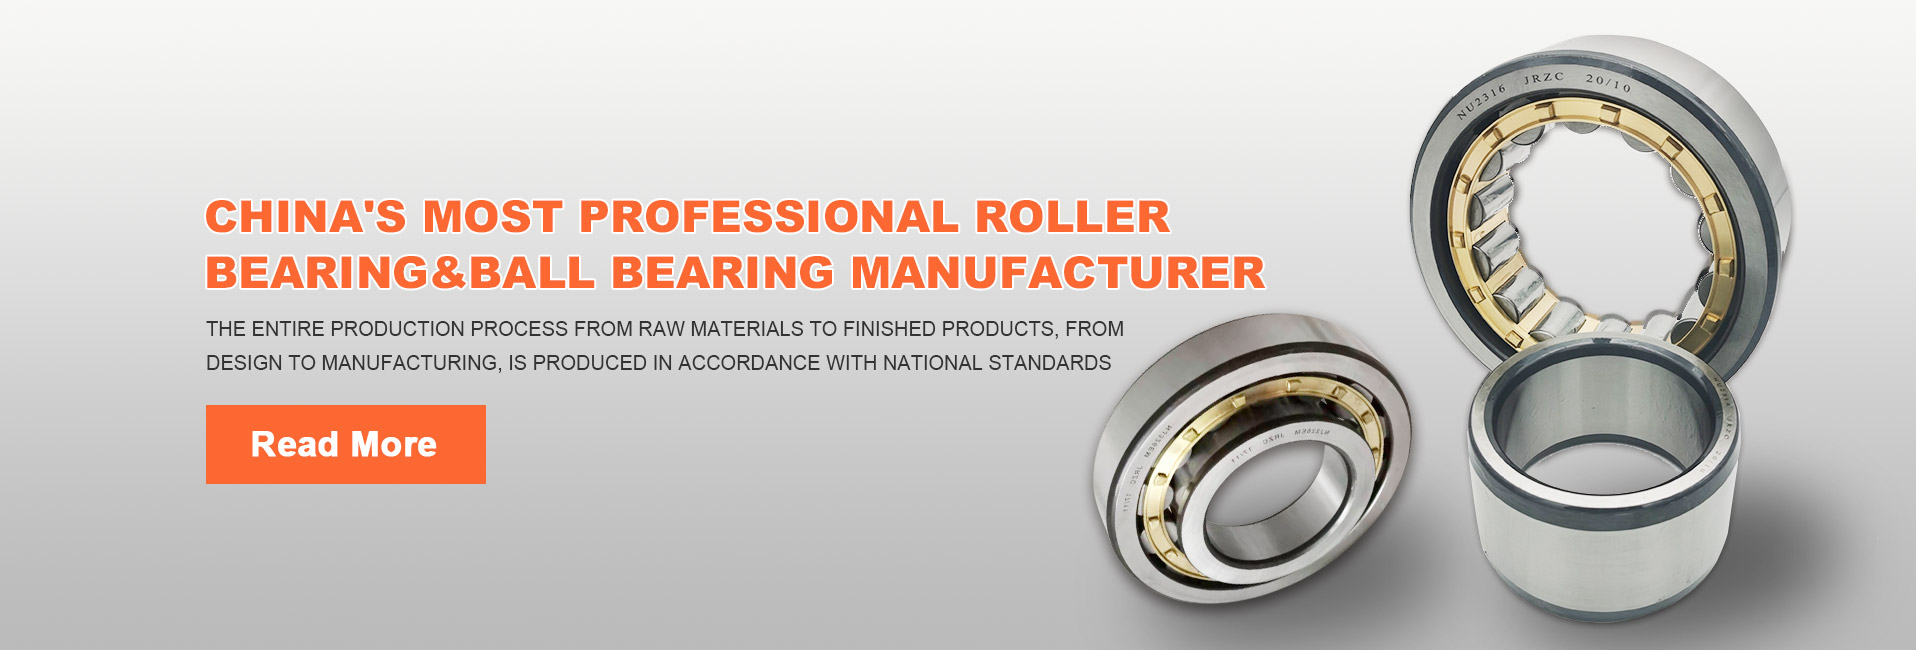 20 years of experience  in manufacturing bearings